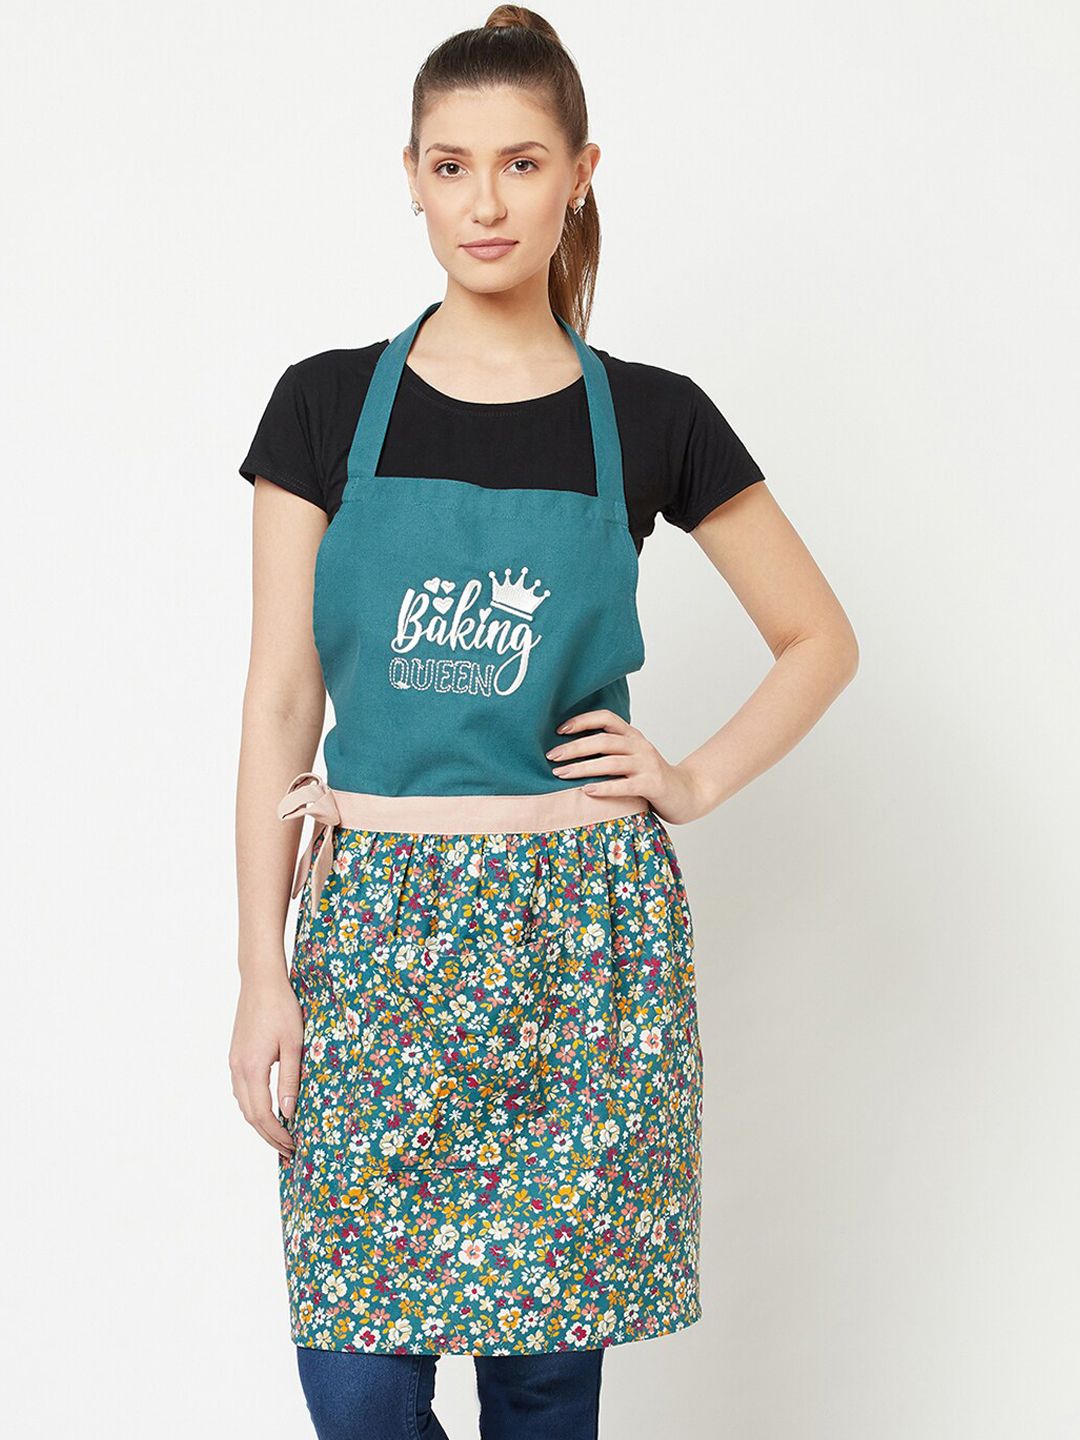 BLANC9 Teal Green & White Printed Pure Cotton Baking Queen Apron Price in India